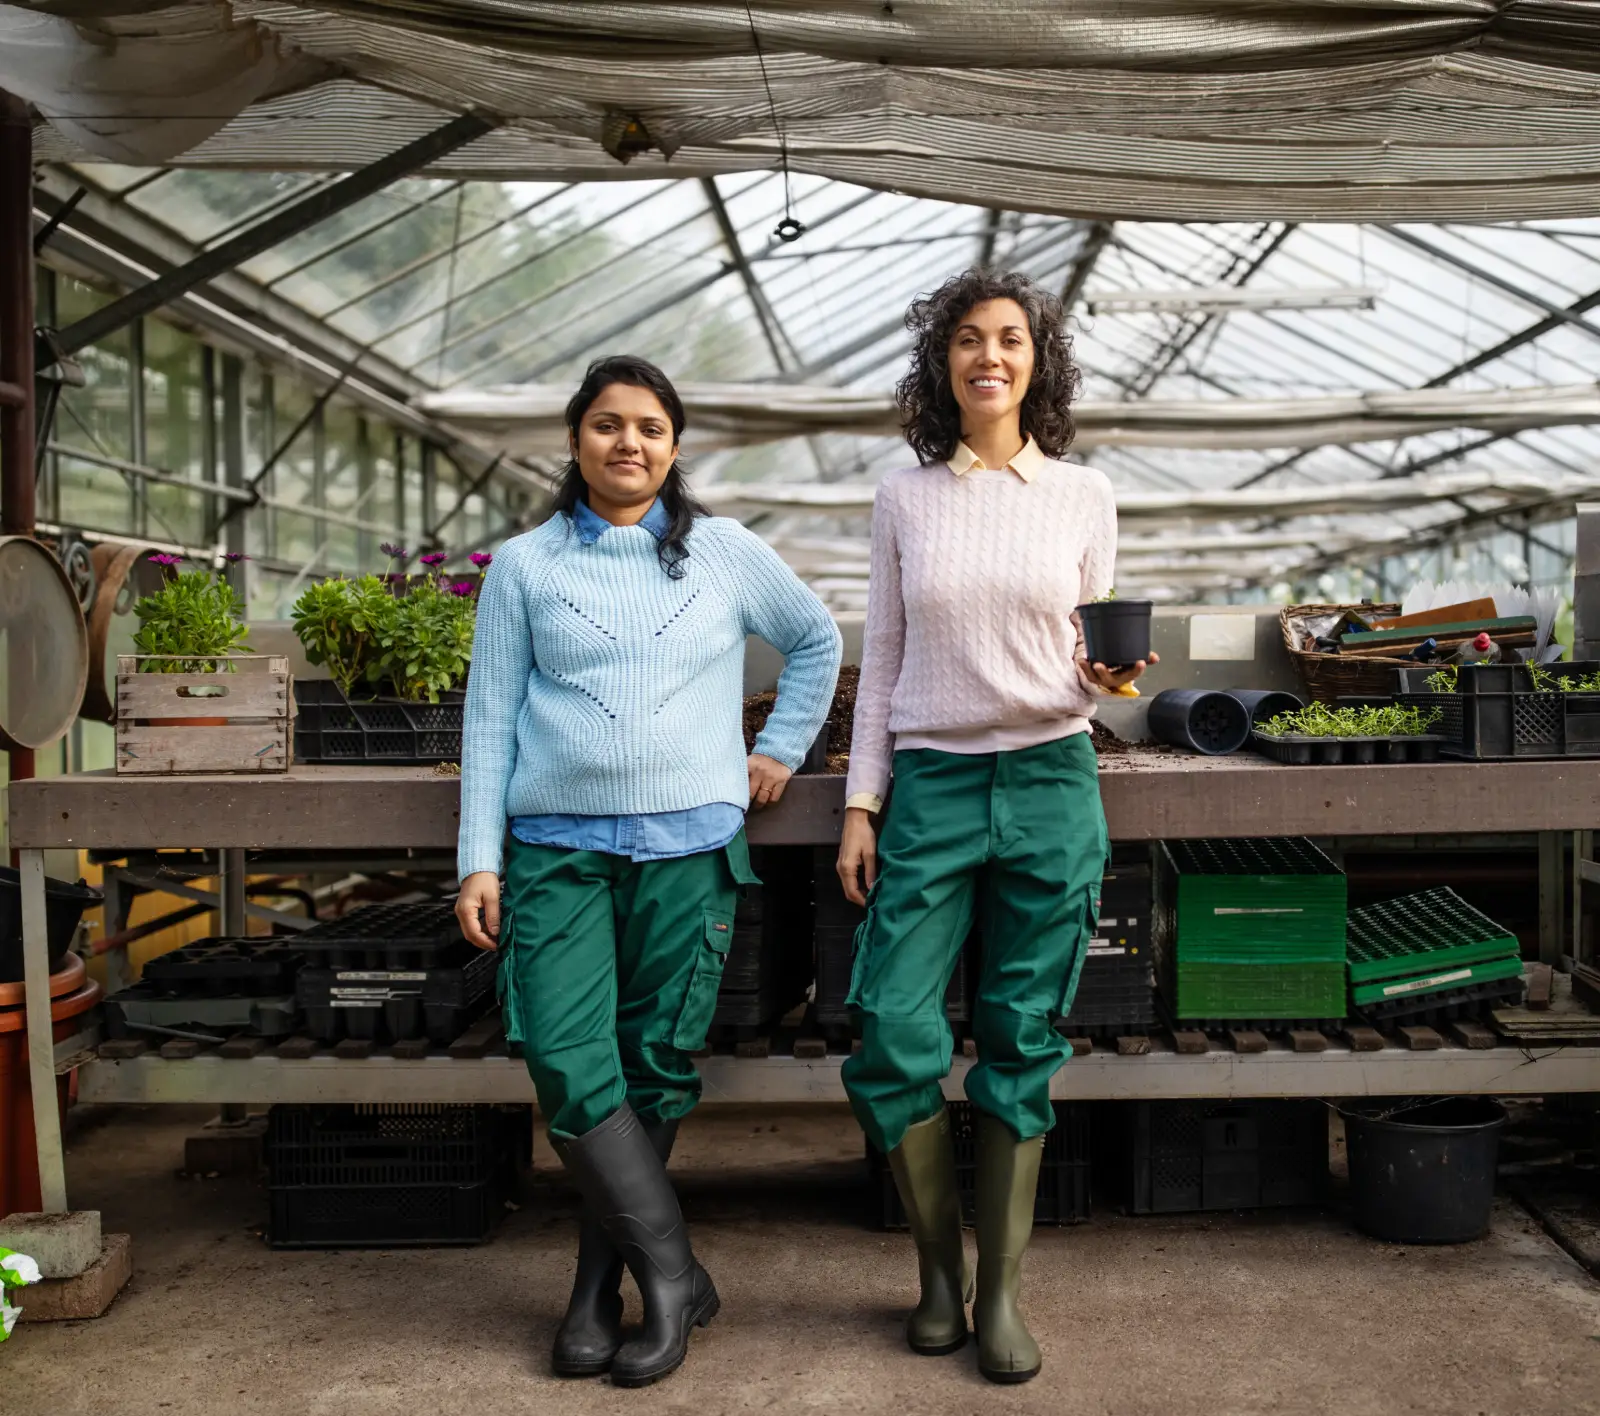 Two woman standing in a greenhouse, smiling at the camera.